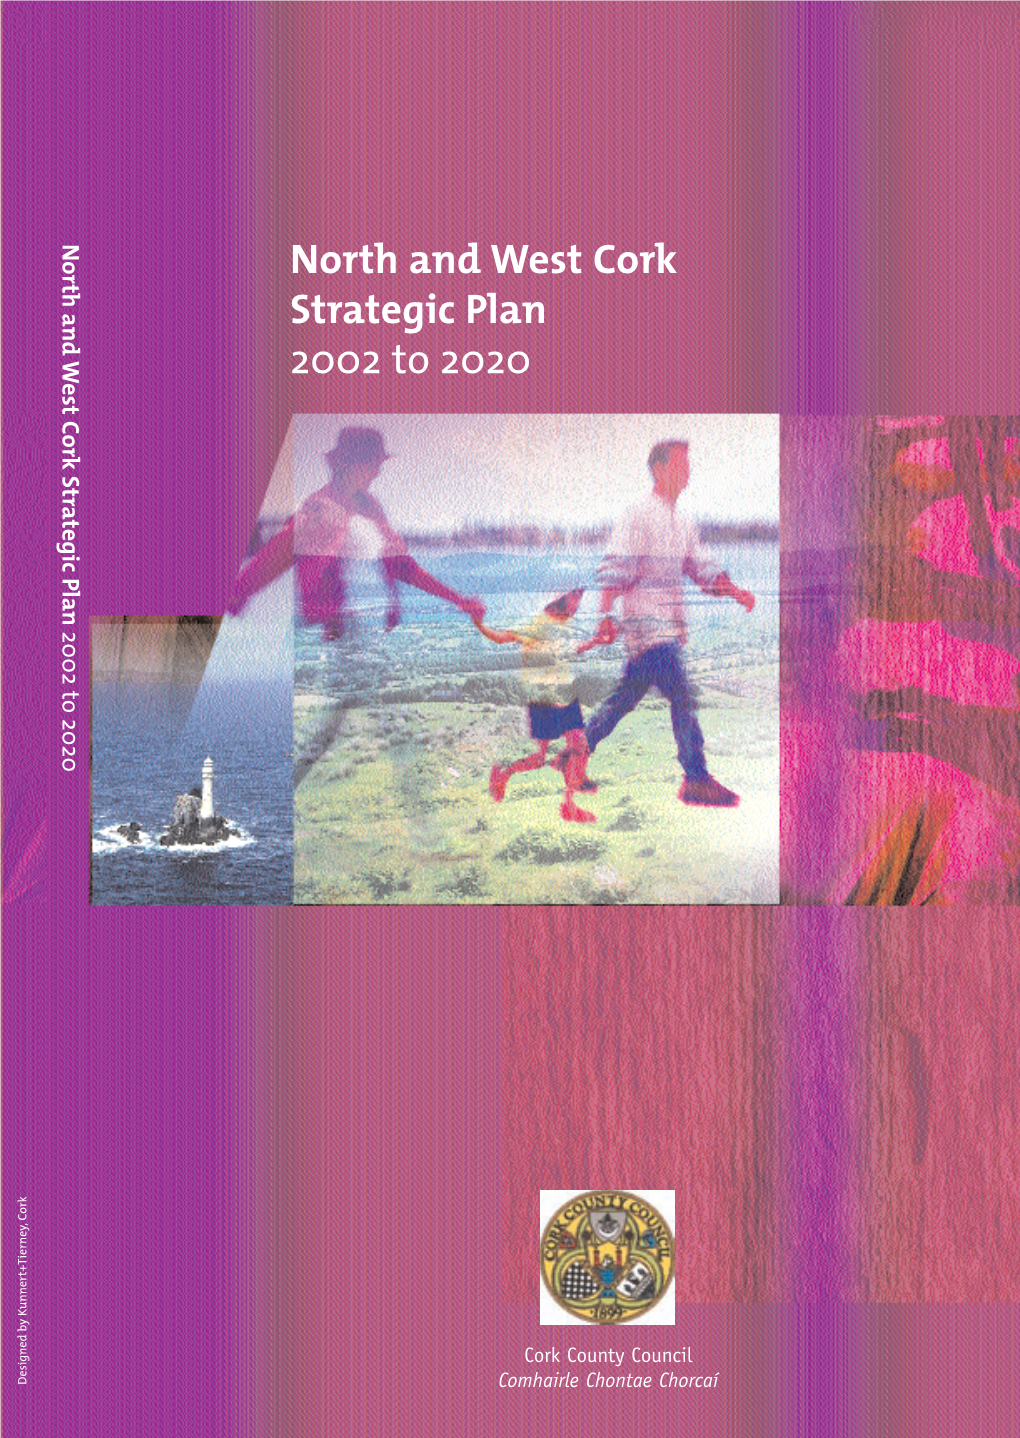 North and West Cork Strategic Plan 2002 to 2020 2002 to 2020